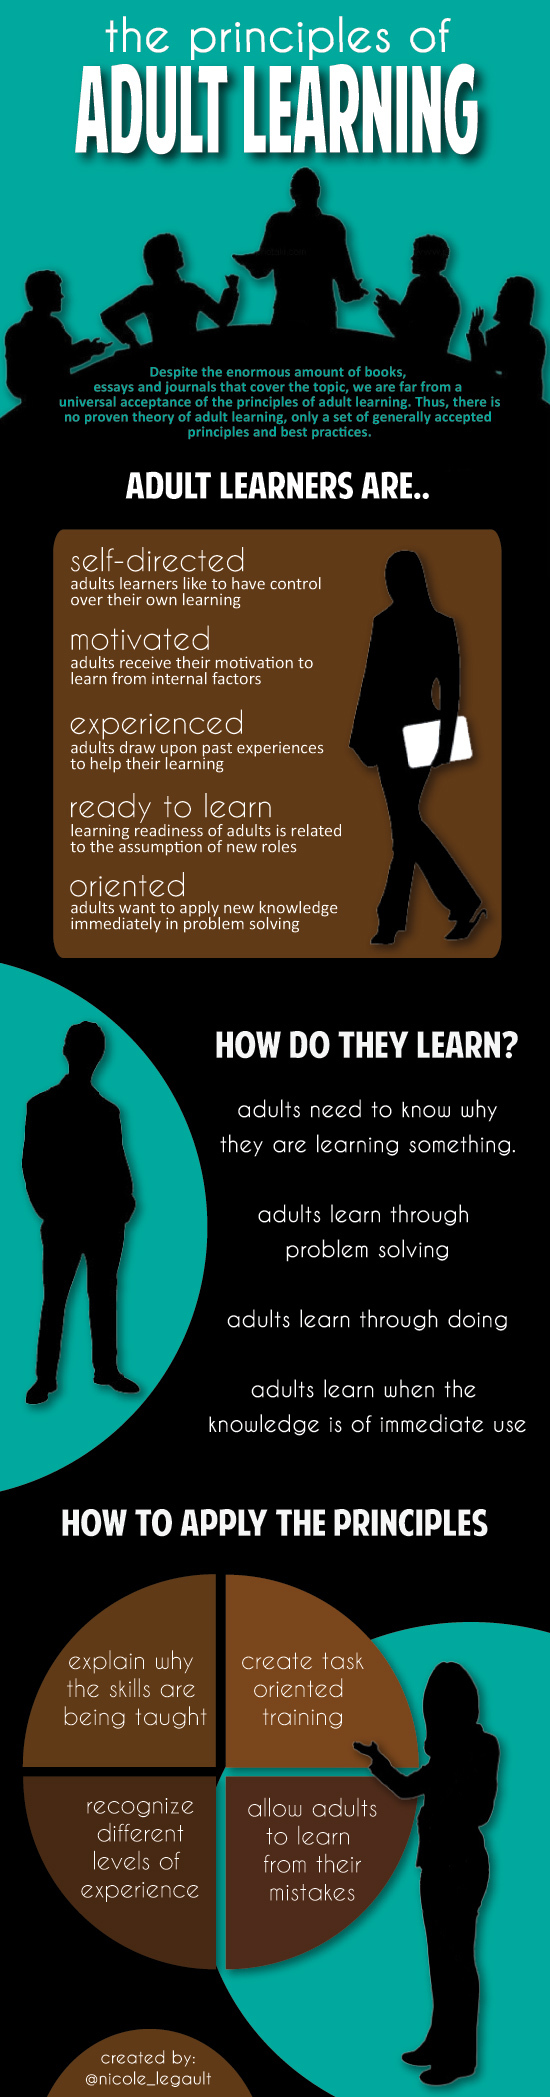 adult-learning1